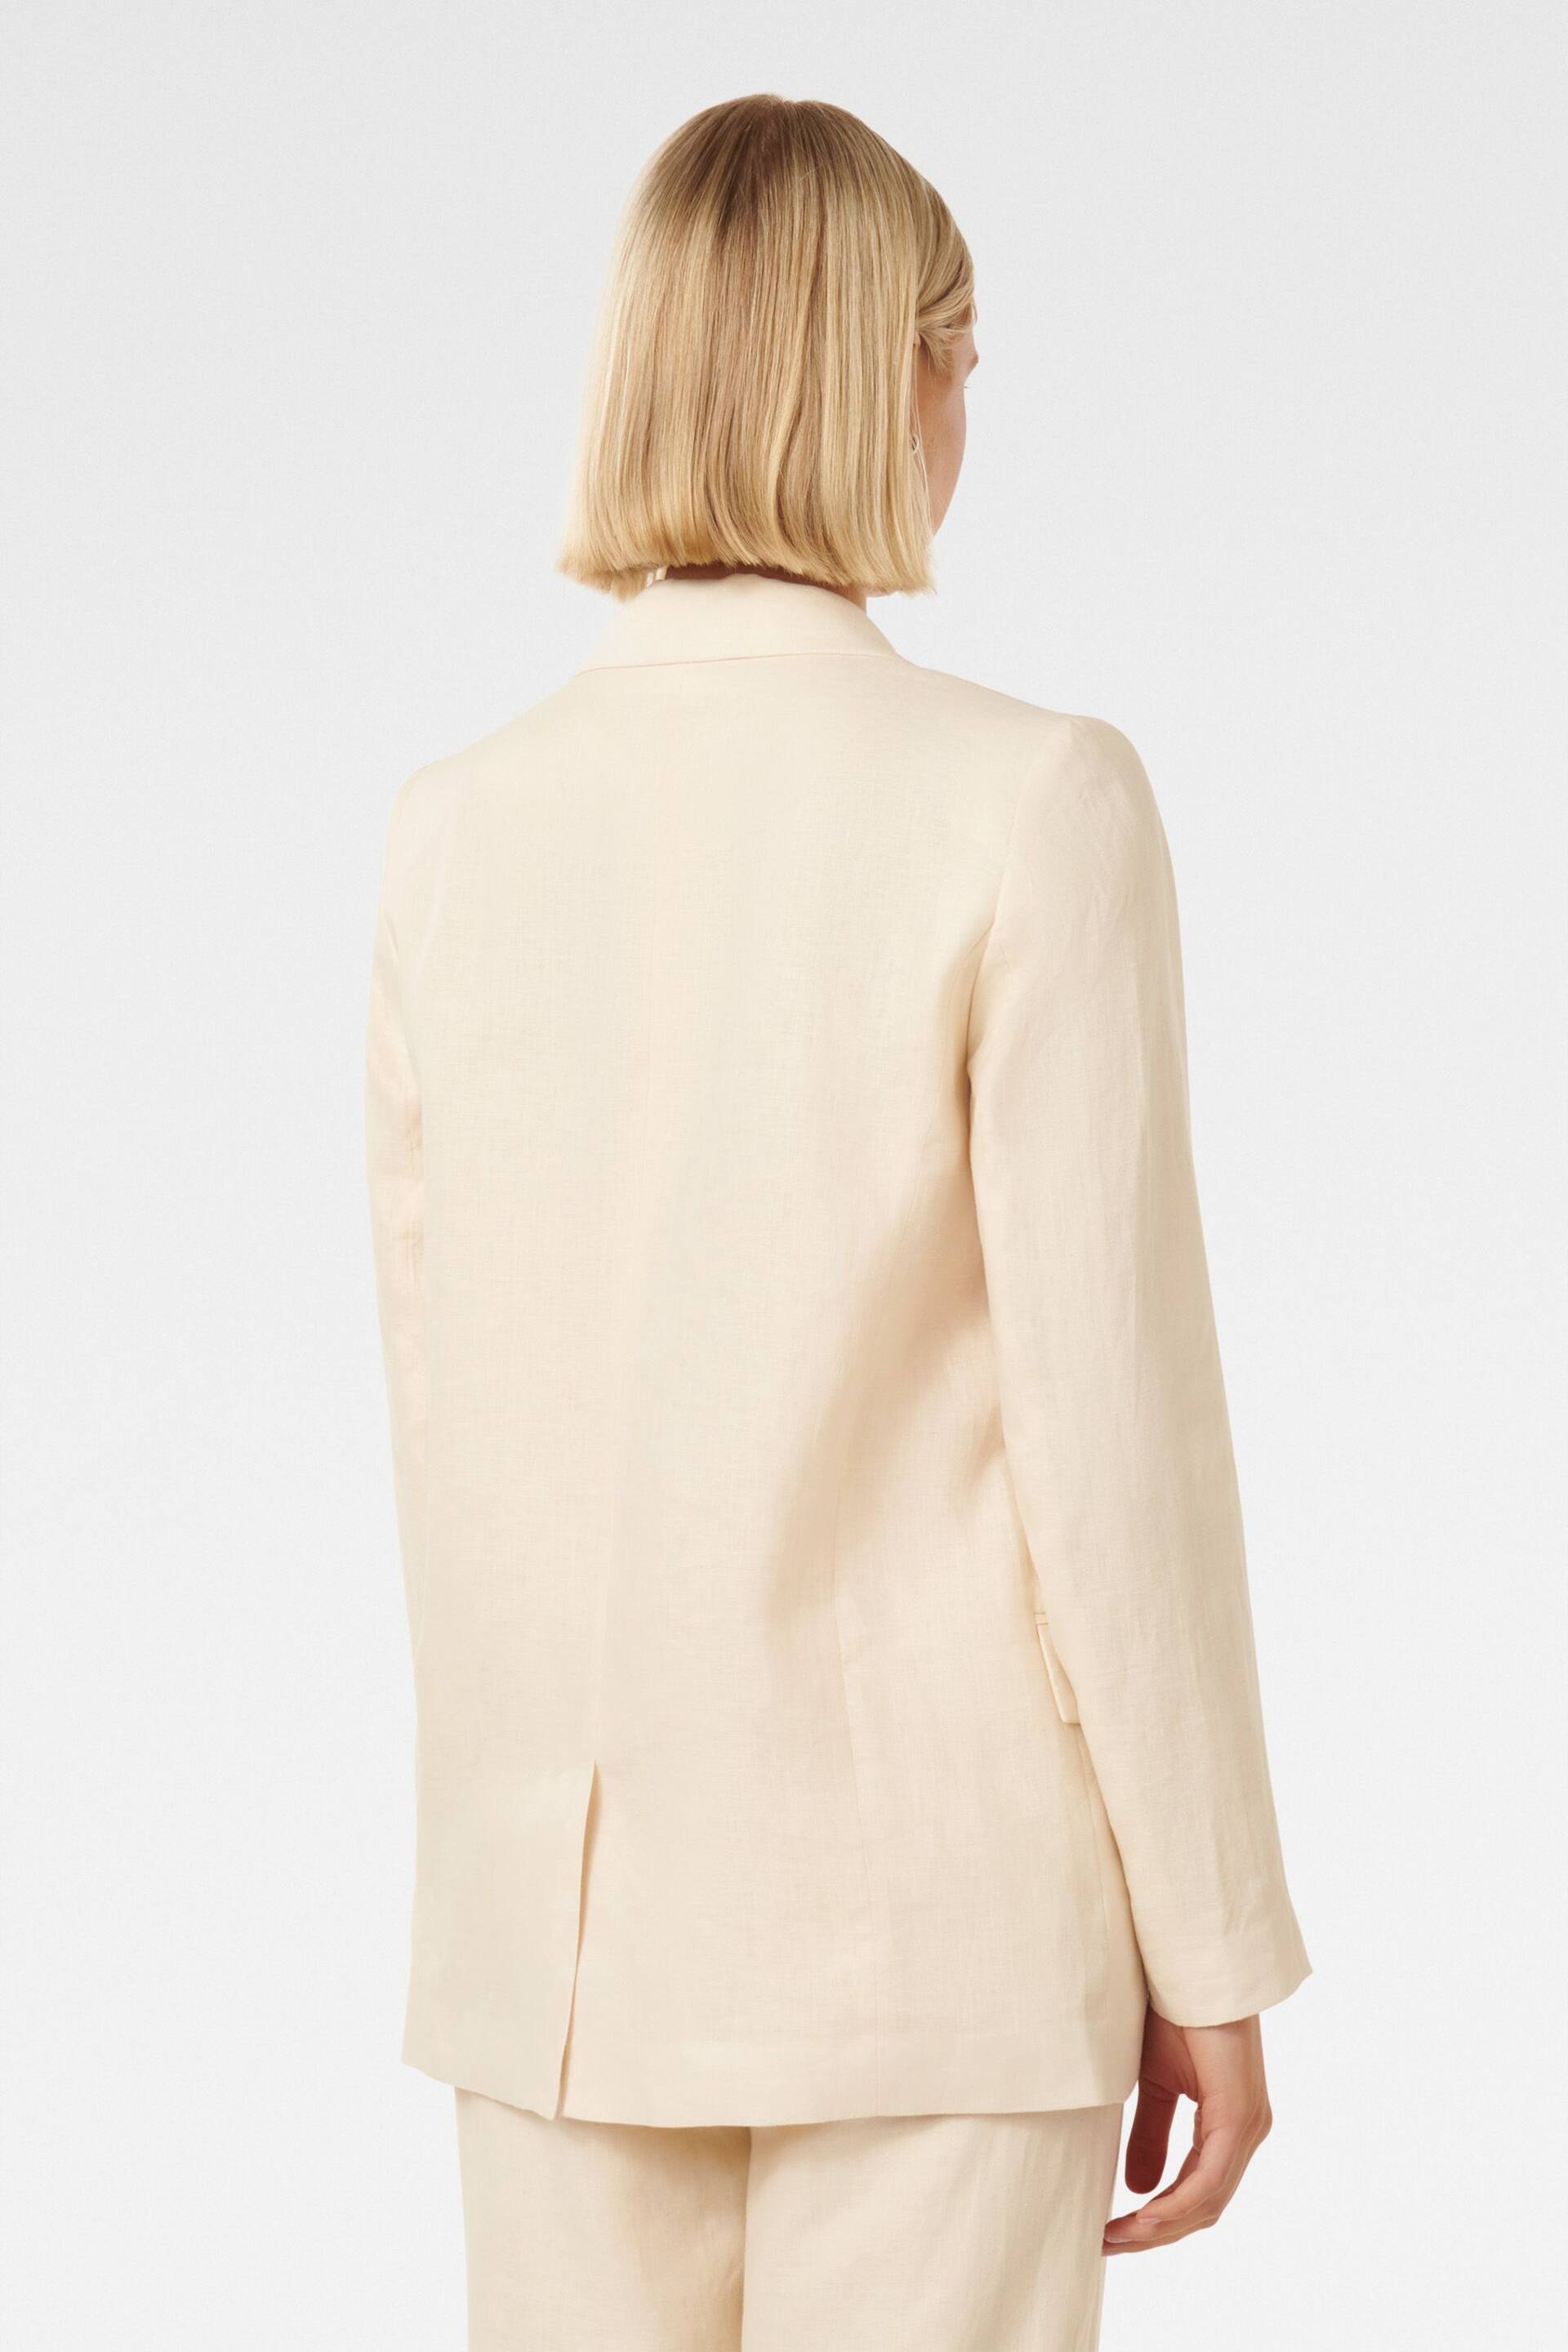 Forever New Cream Pure Linen Lacey Blazer - Image 4 of 5